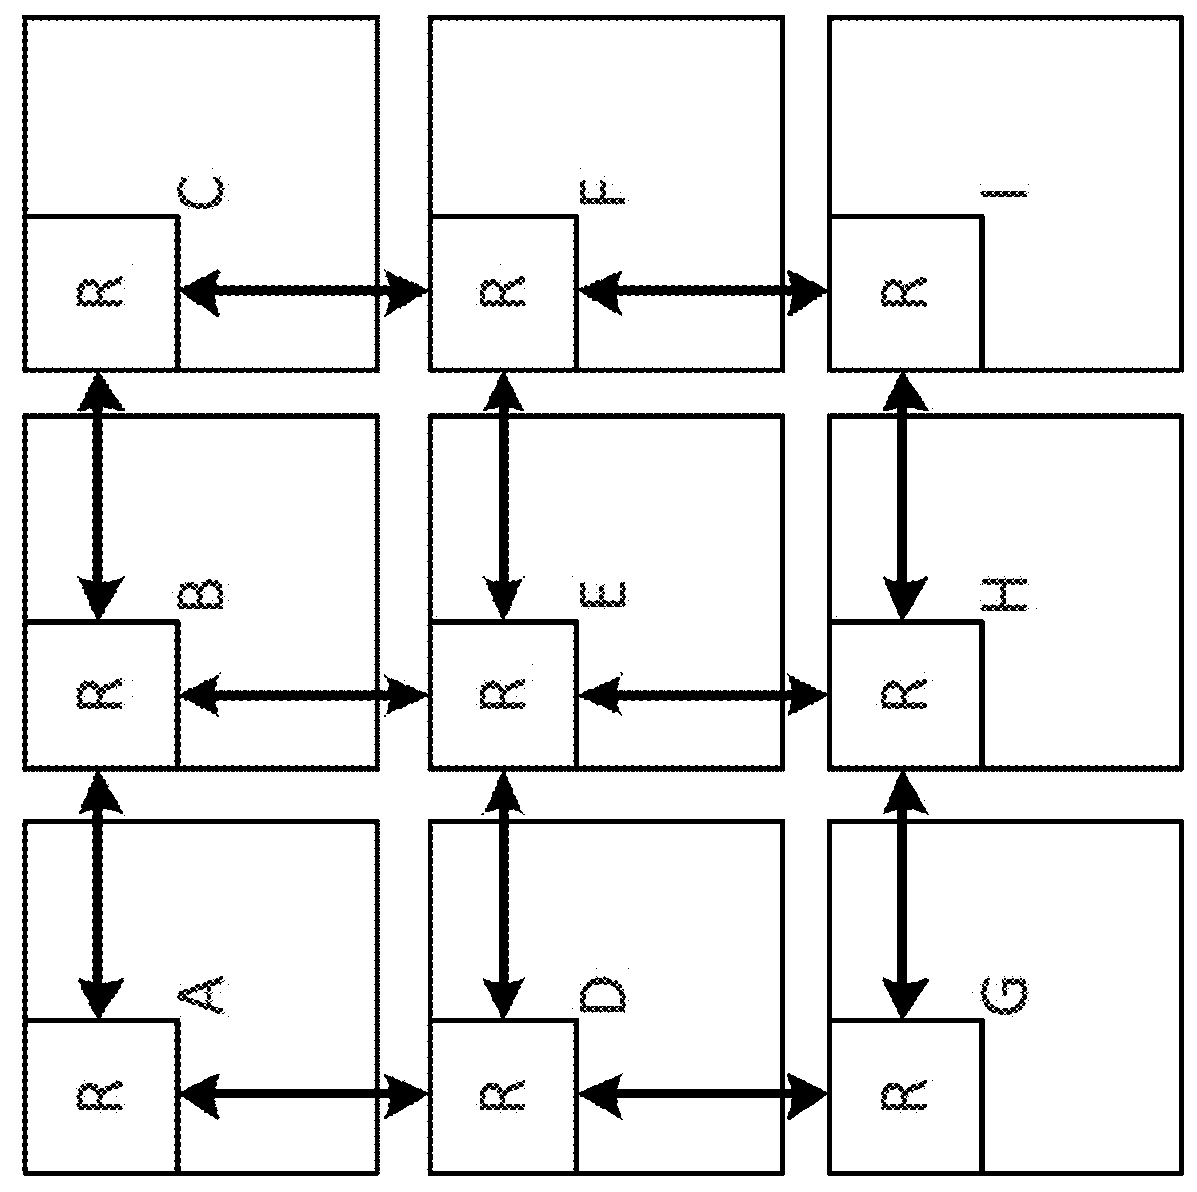 Traffic mapping of a network on chip through machine learning